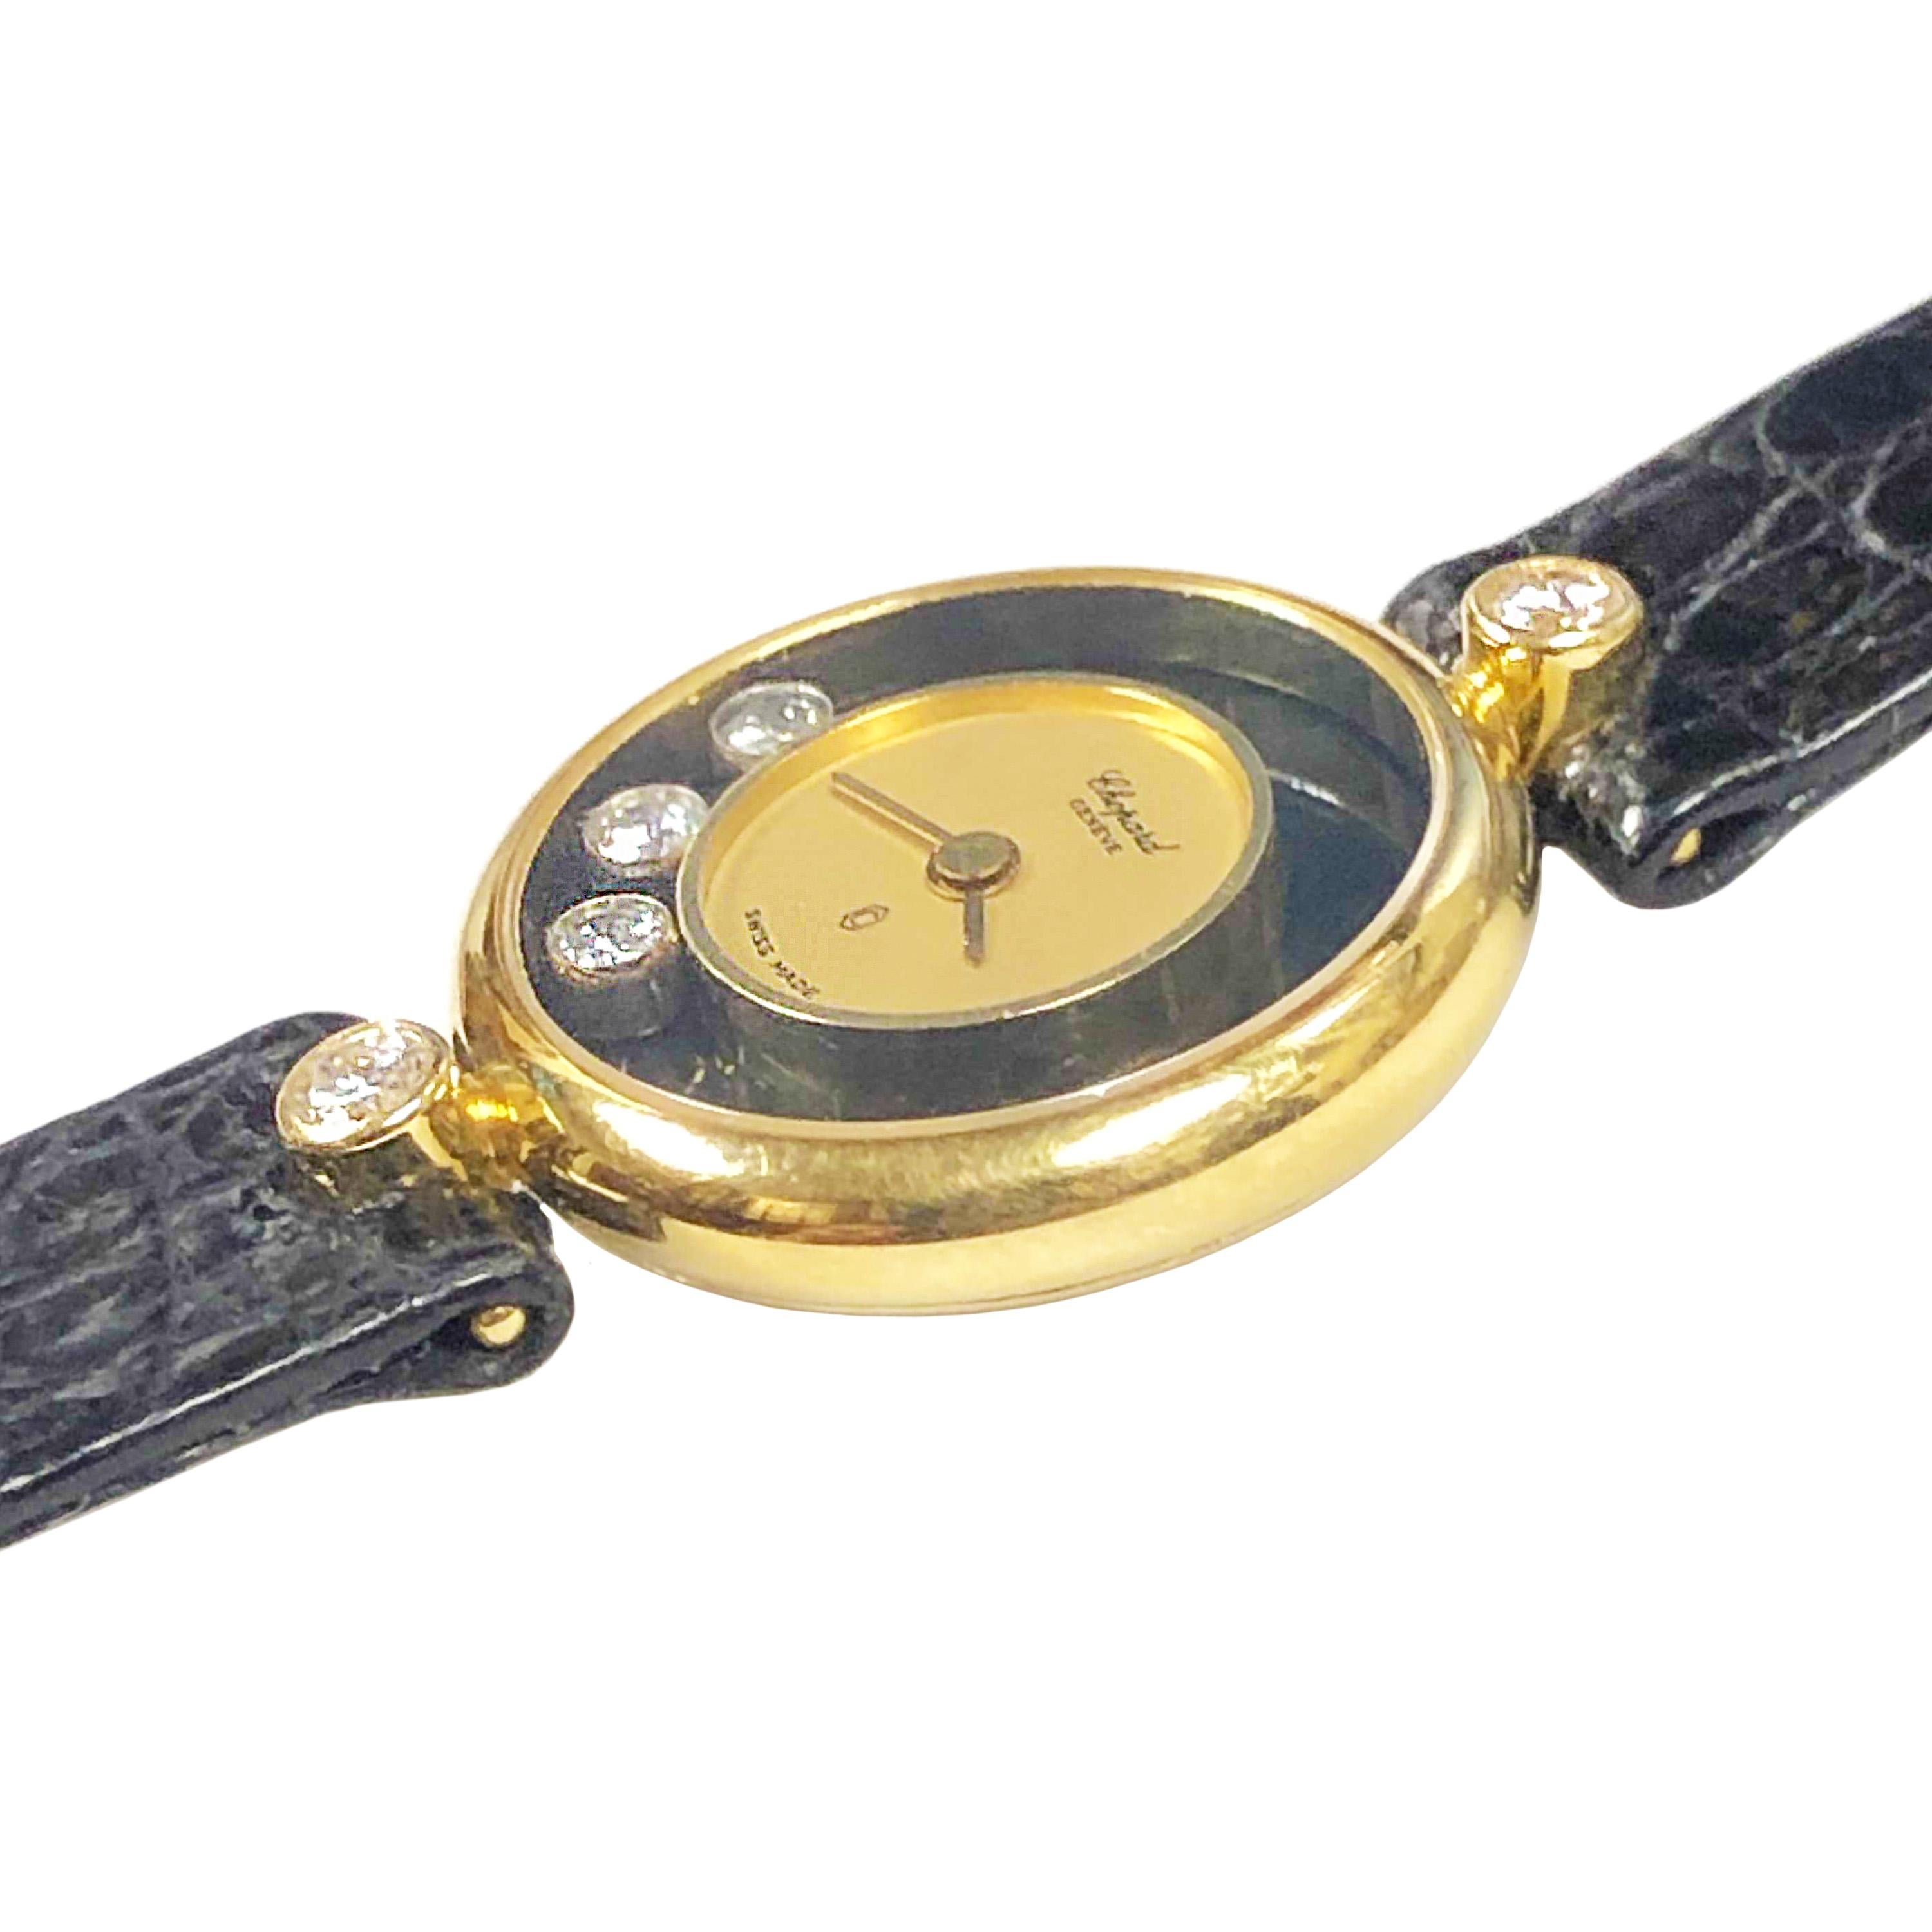 Circa 2000 ladies Chopard Happy Diamond collection Wrist watch, 21 MM 18K Yellow Gold case set with a Round Brilliant cut Diamond of .10 Ct. each set on each end of the case. Back set Quartz movement. Onyx and Gold Dial with 3 floating Diamonds